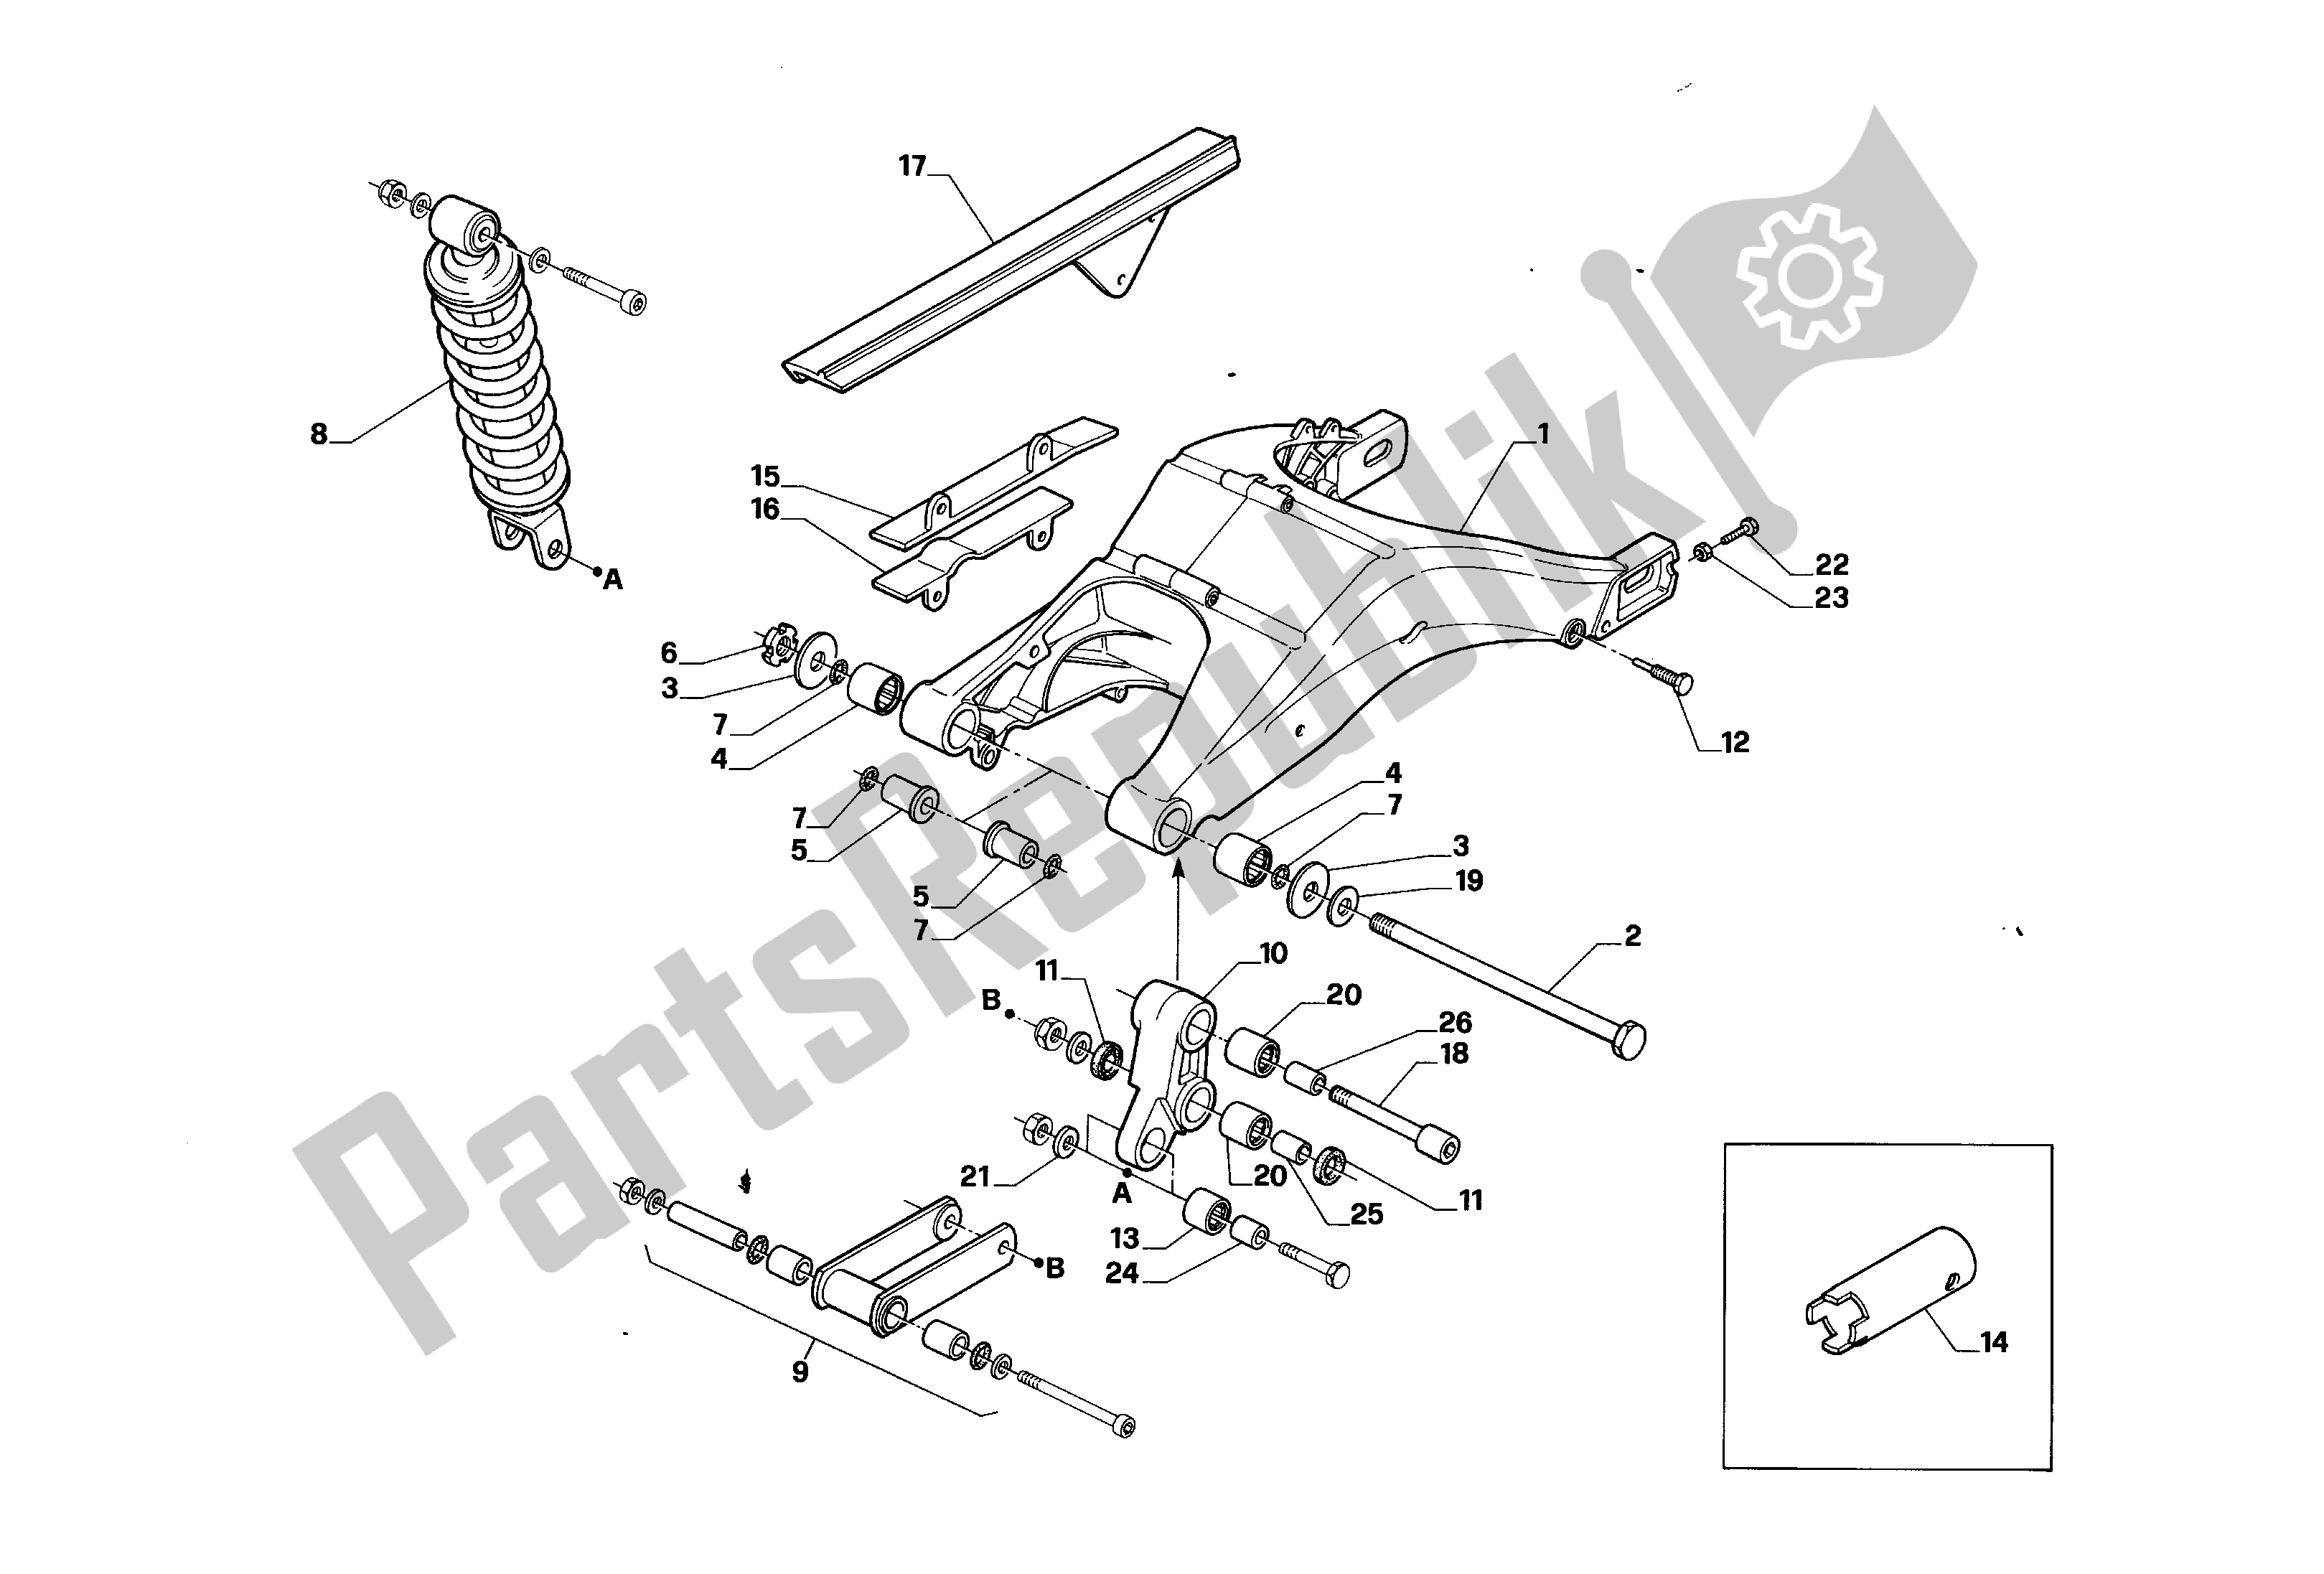 All parts for the Rear Fork And Suspension of the Aprilia RS 125 1992 - 1994